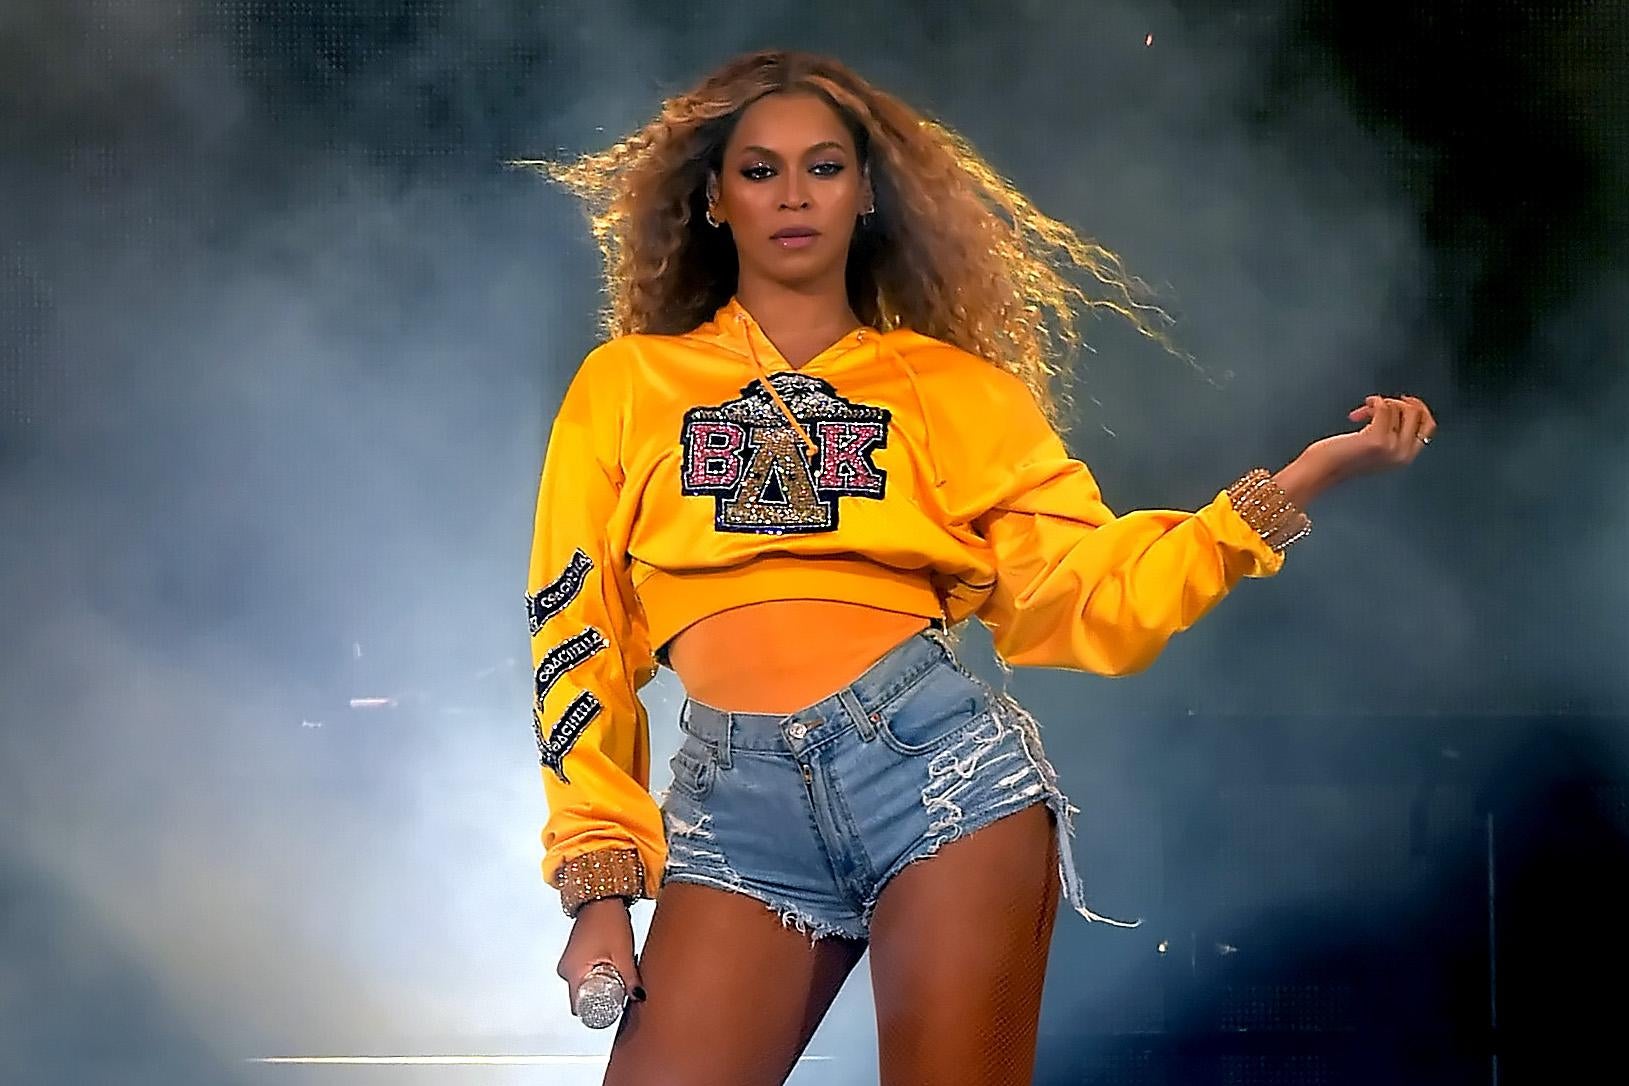 Beyonce Knowles, wearing a yellow sweatshirt and denim shorts, performs onstage during 2018 Coachella music festival.